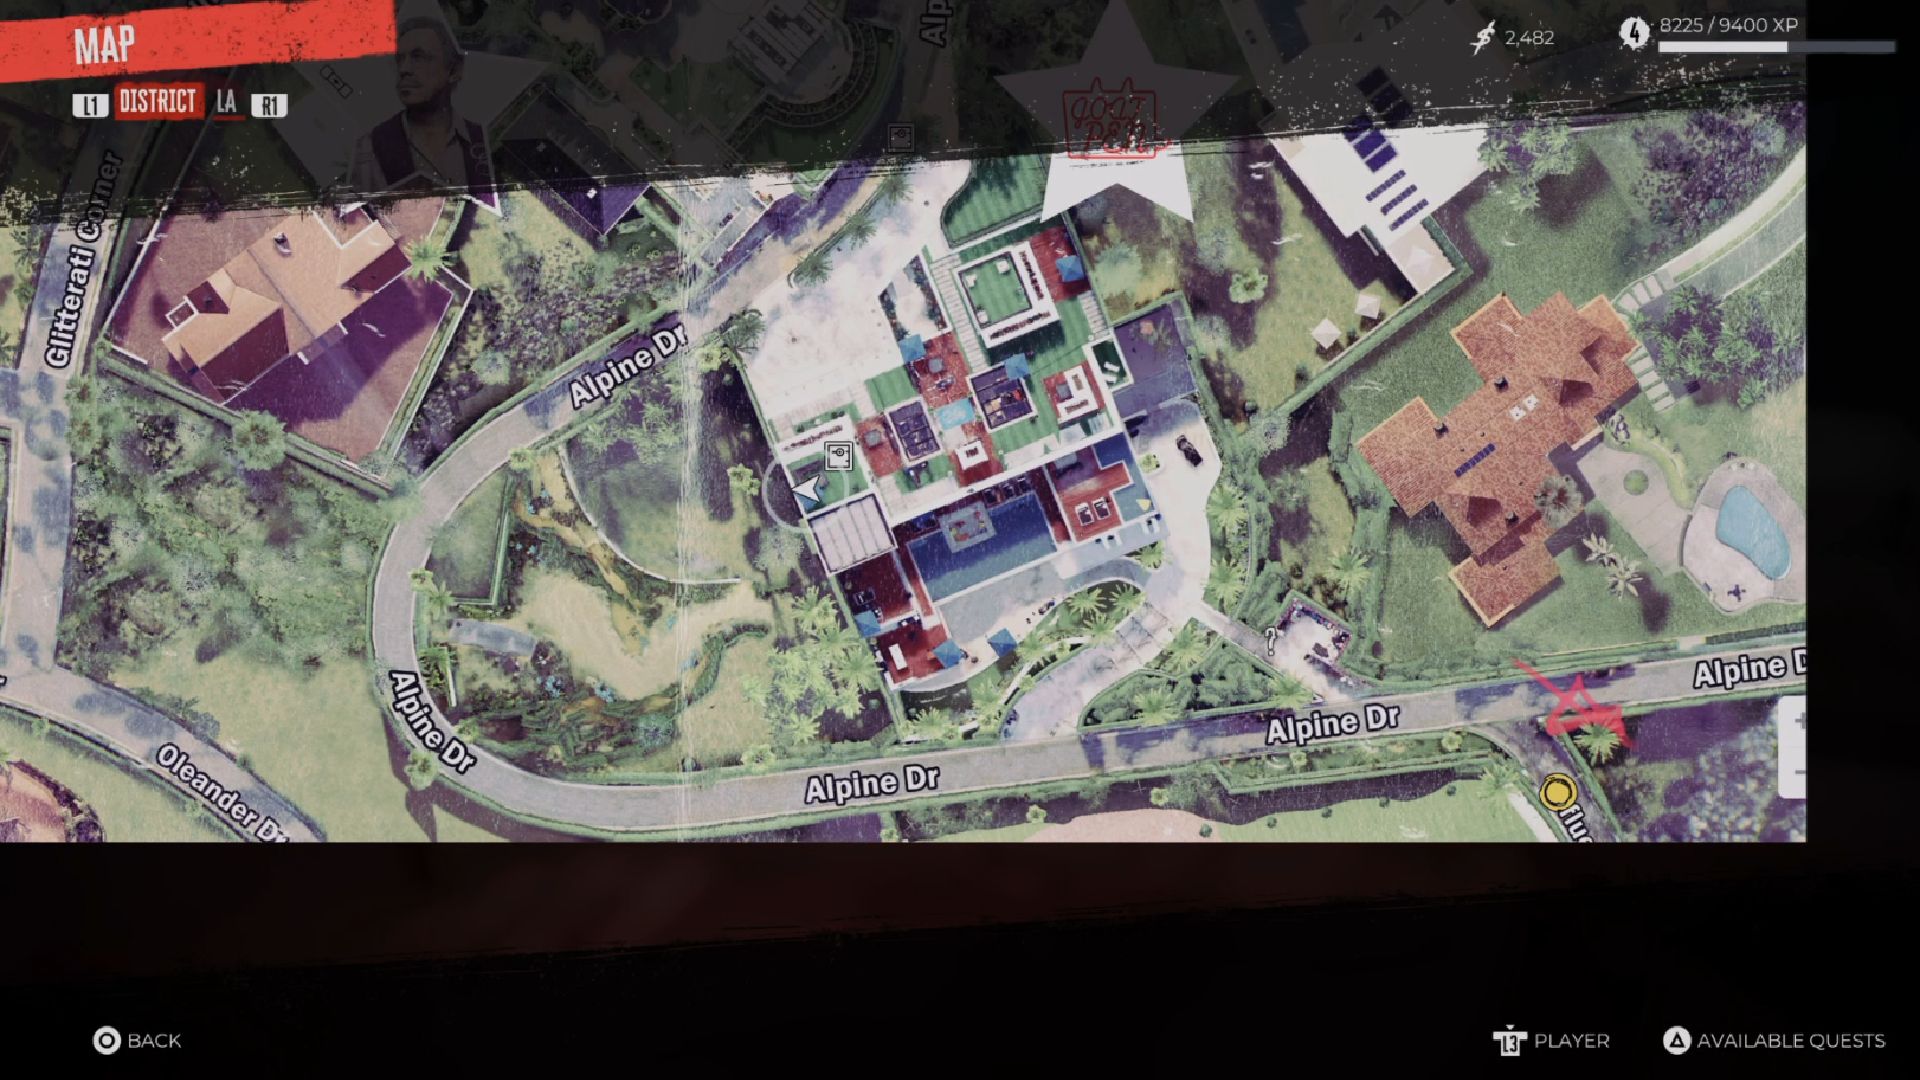 Dead Island 2 Goat Pen keycard: The map showing the keycard can be seen